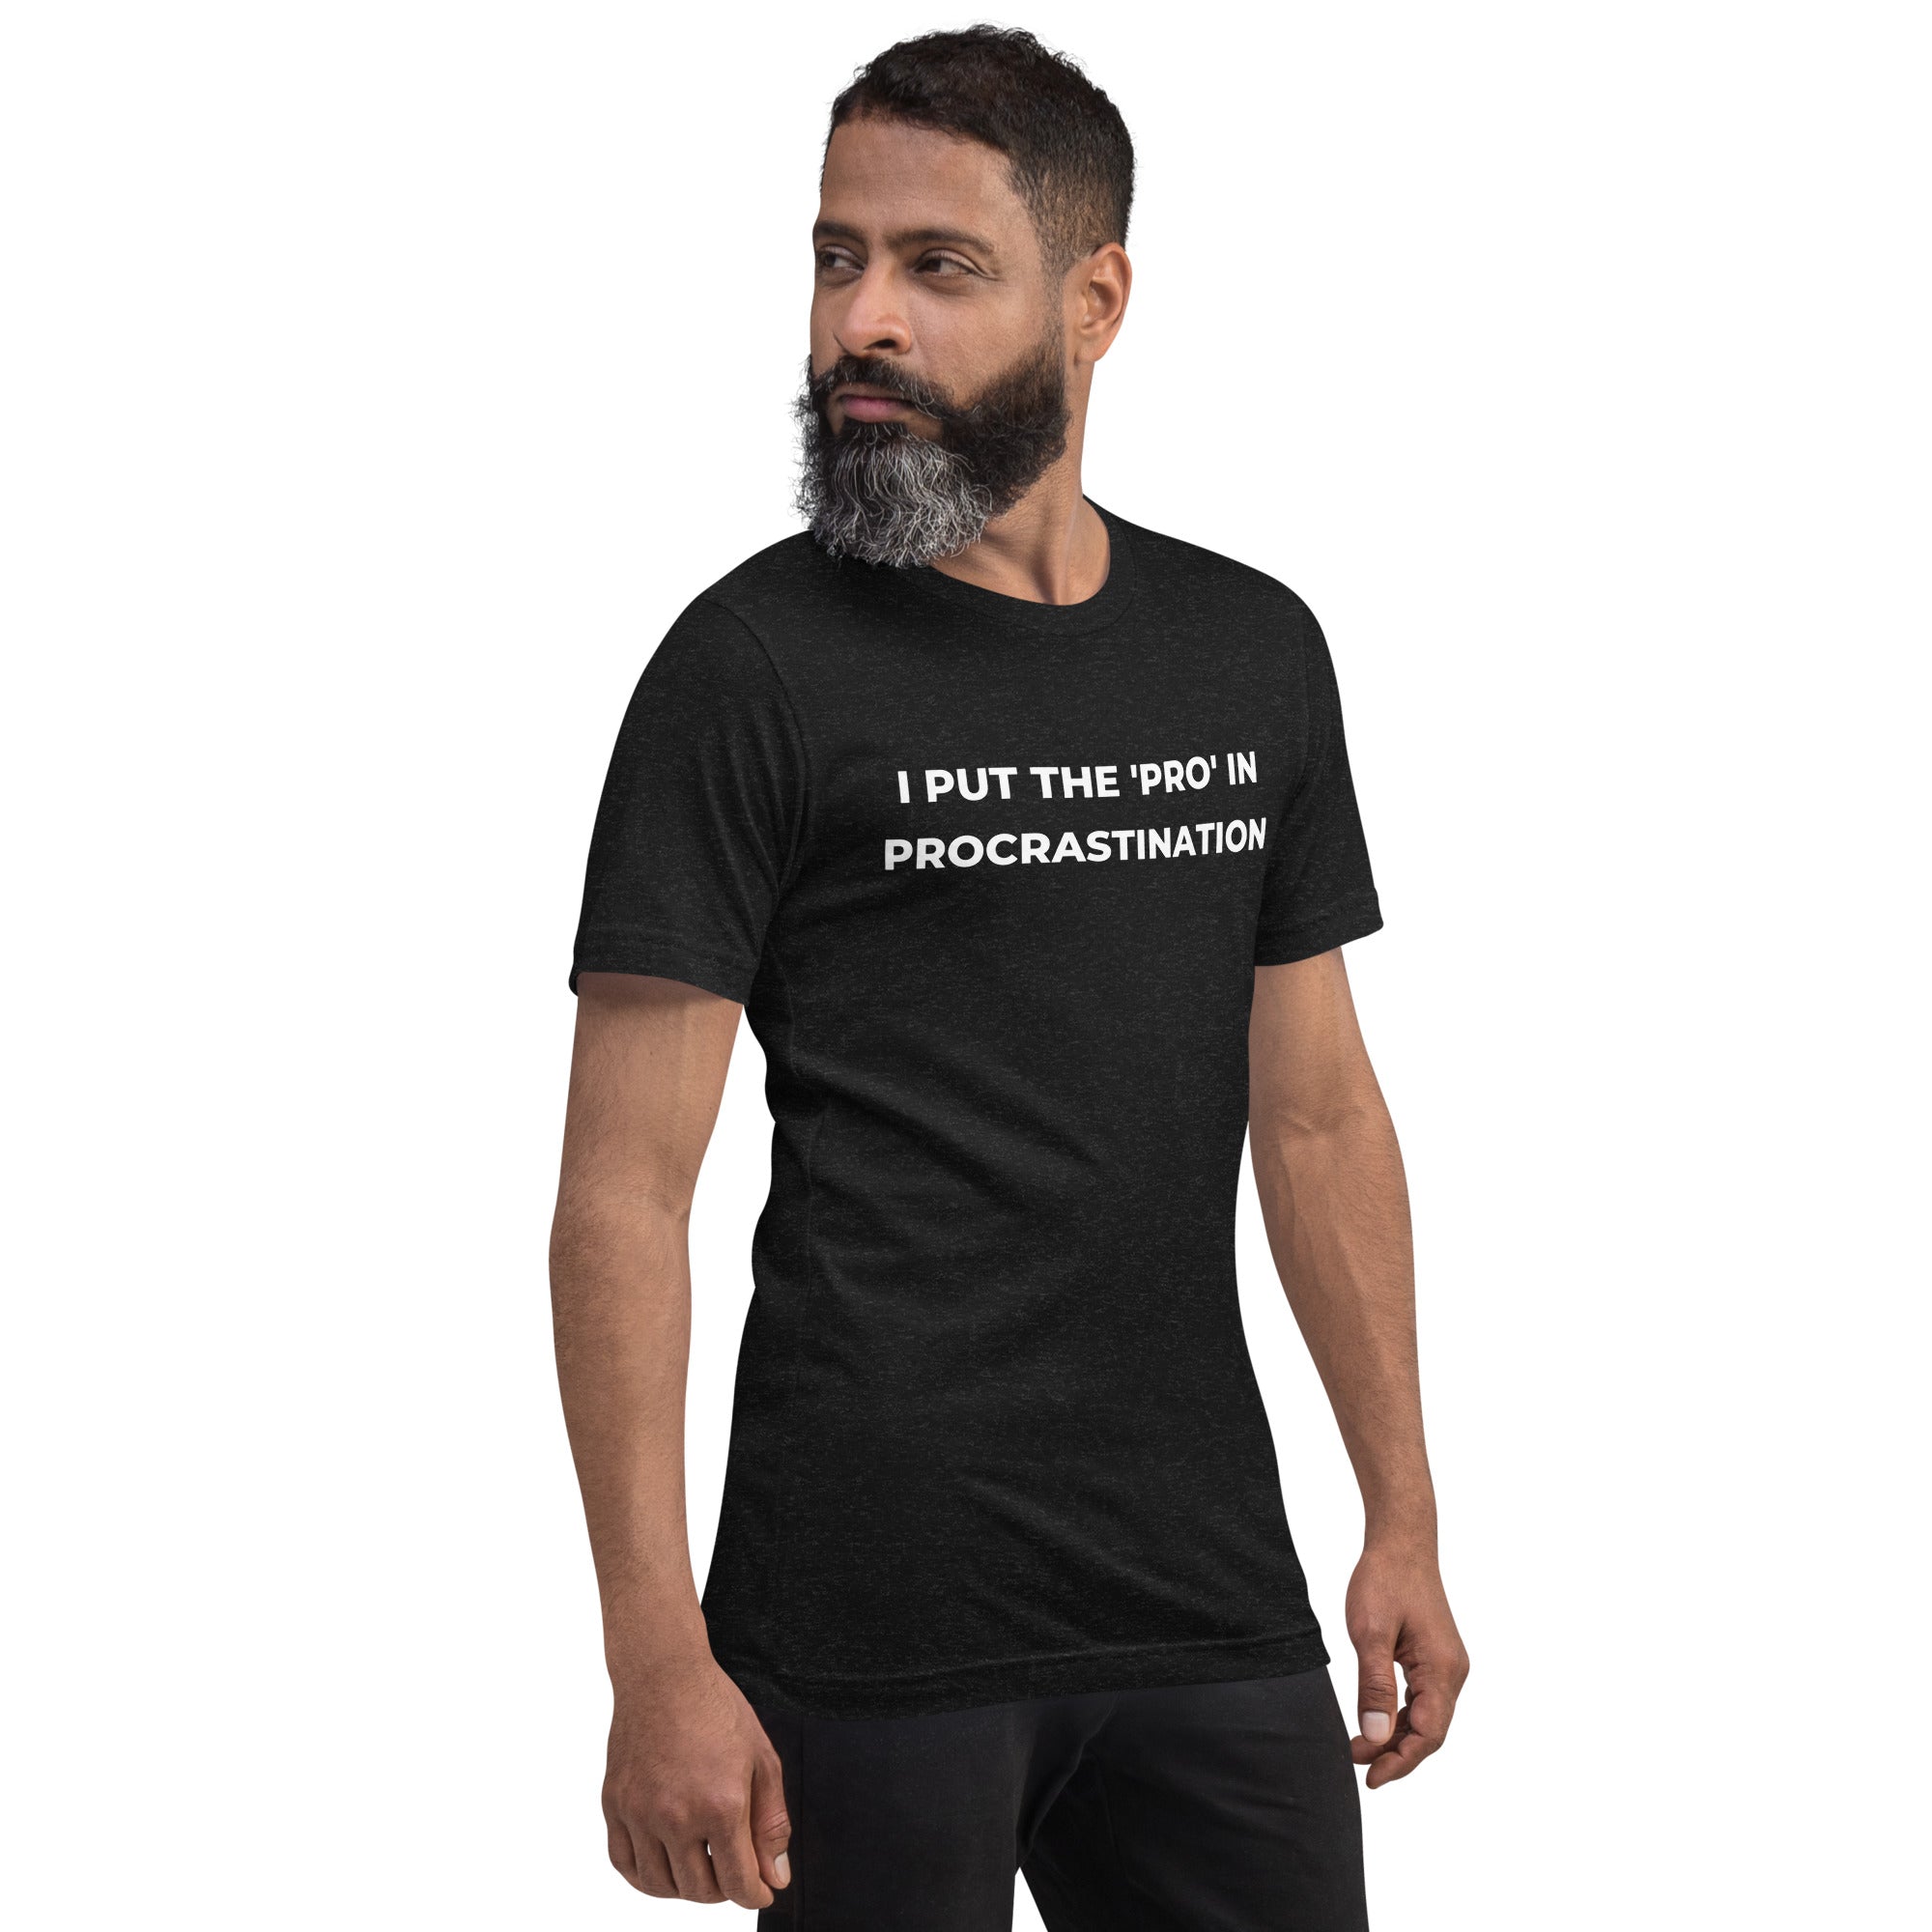 I Put The 'Pro' in Procrastination, Funny Procrastination Shirt, Sarcastic Saying Tee, Lazy T-Shirt for Men and Women - PennyJellies